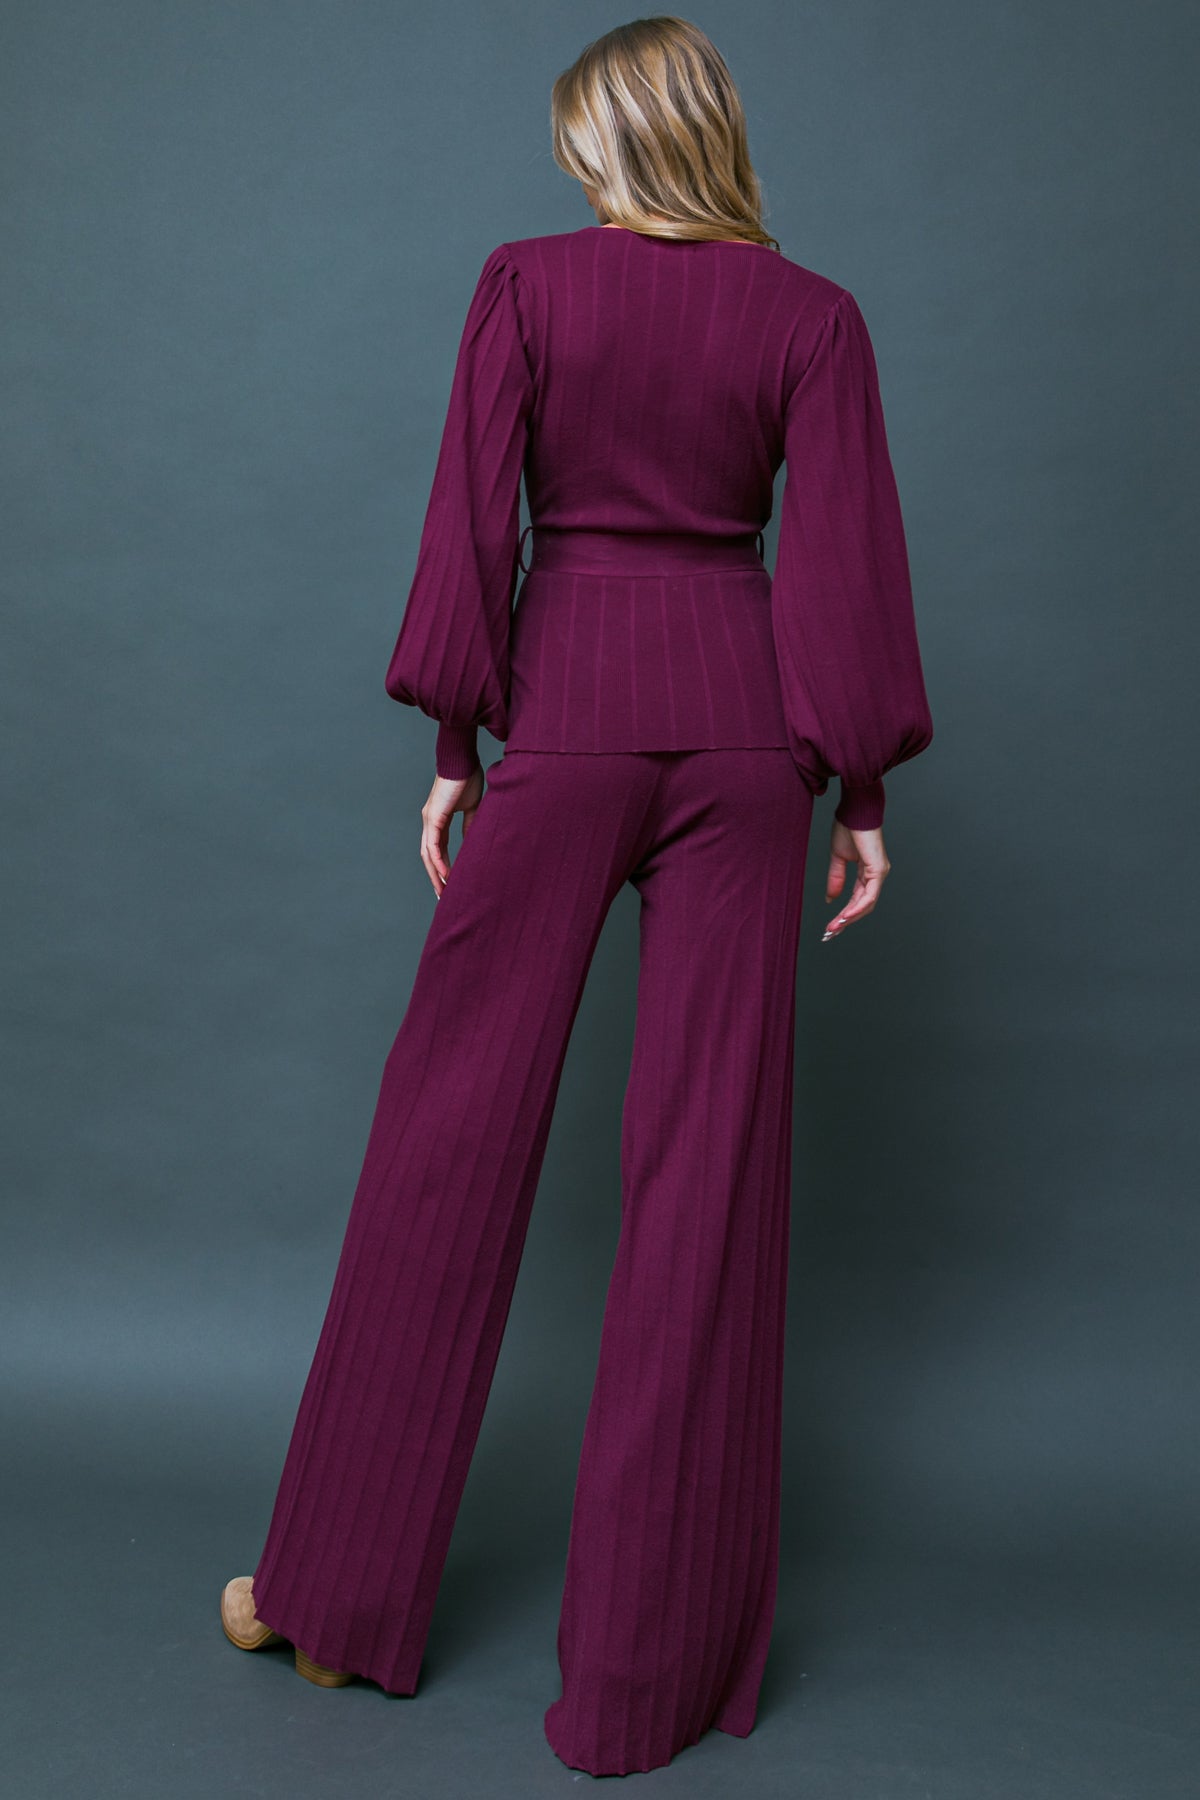 UNDENIABLE ALLURE SWEATER KNIT TOP AND PANT SET